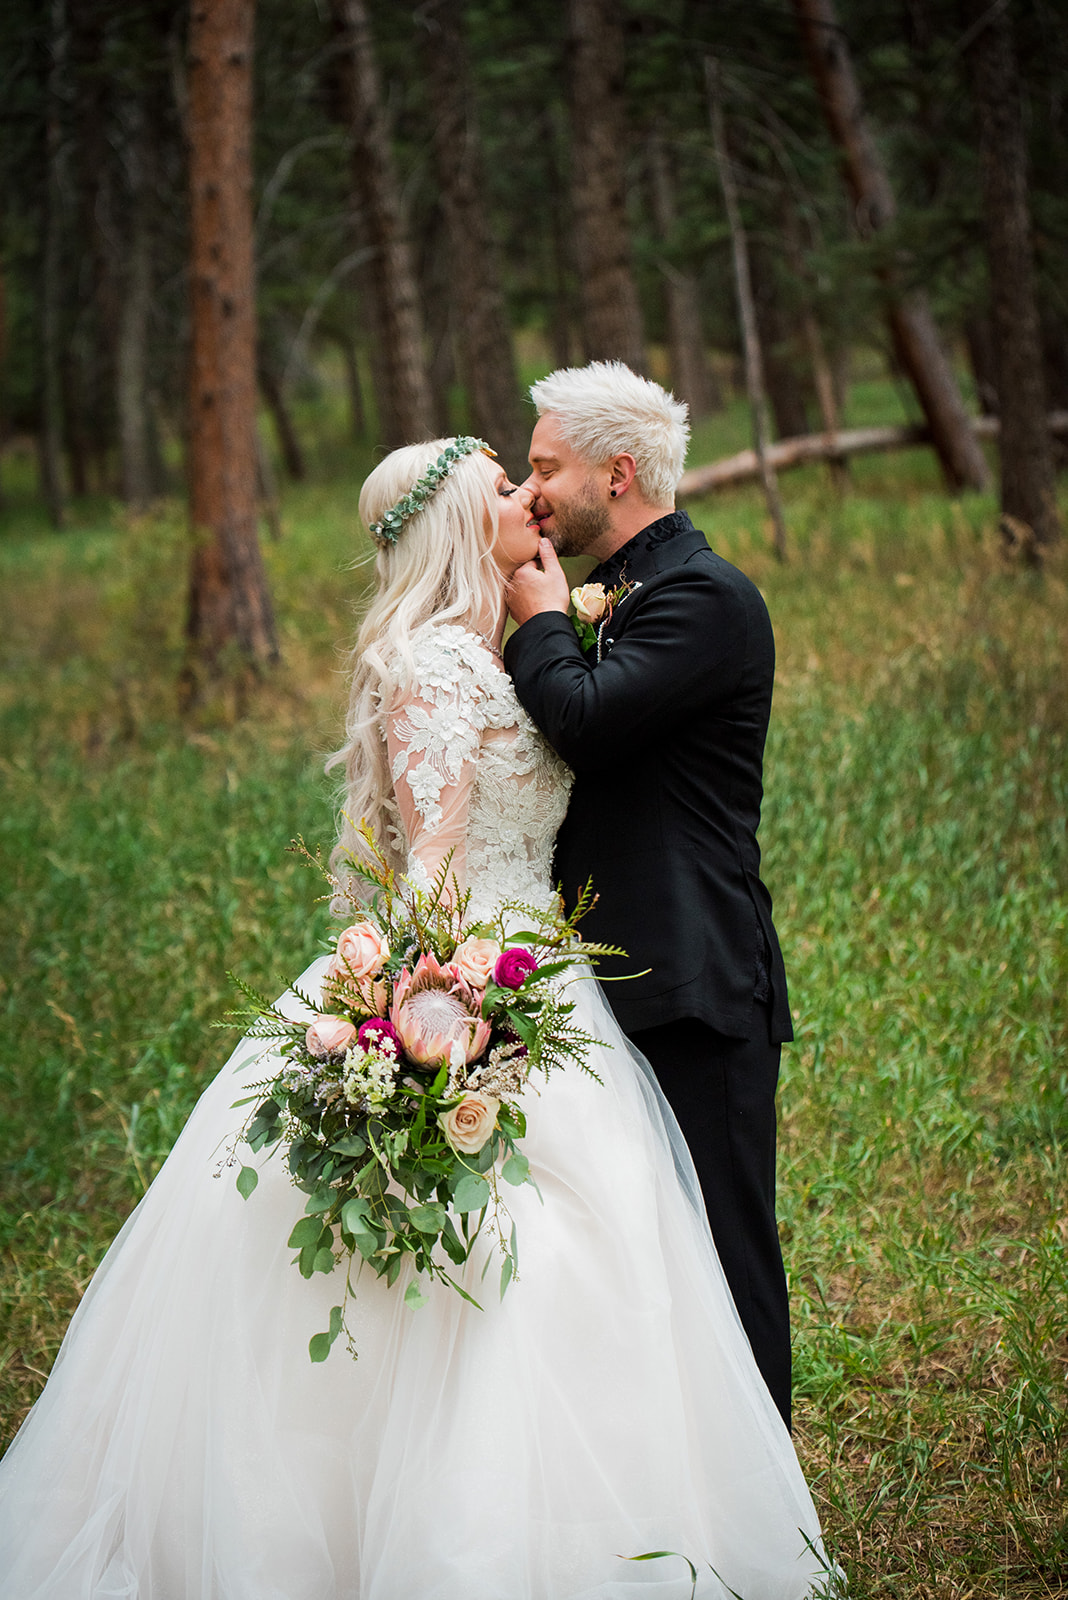 Bride and groom share a kiss in an enchanting forest.